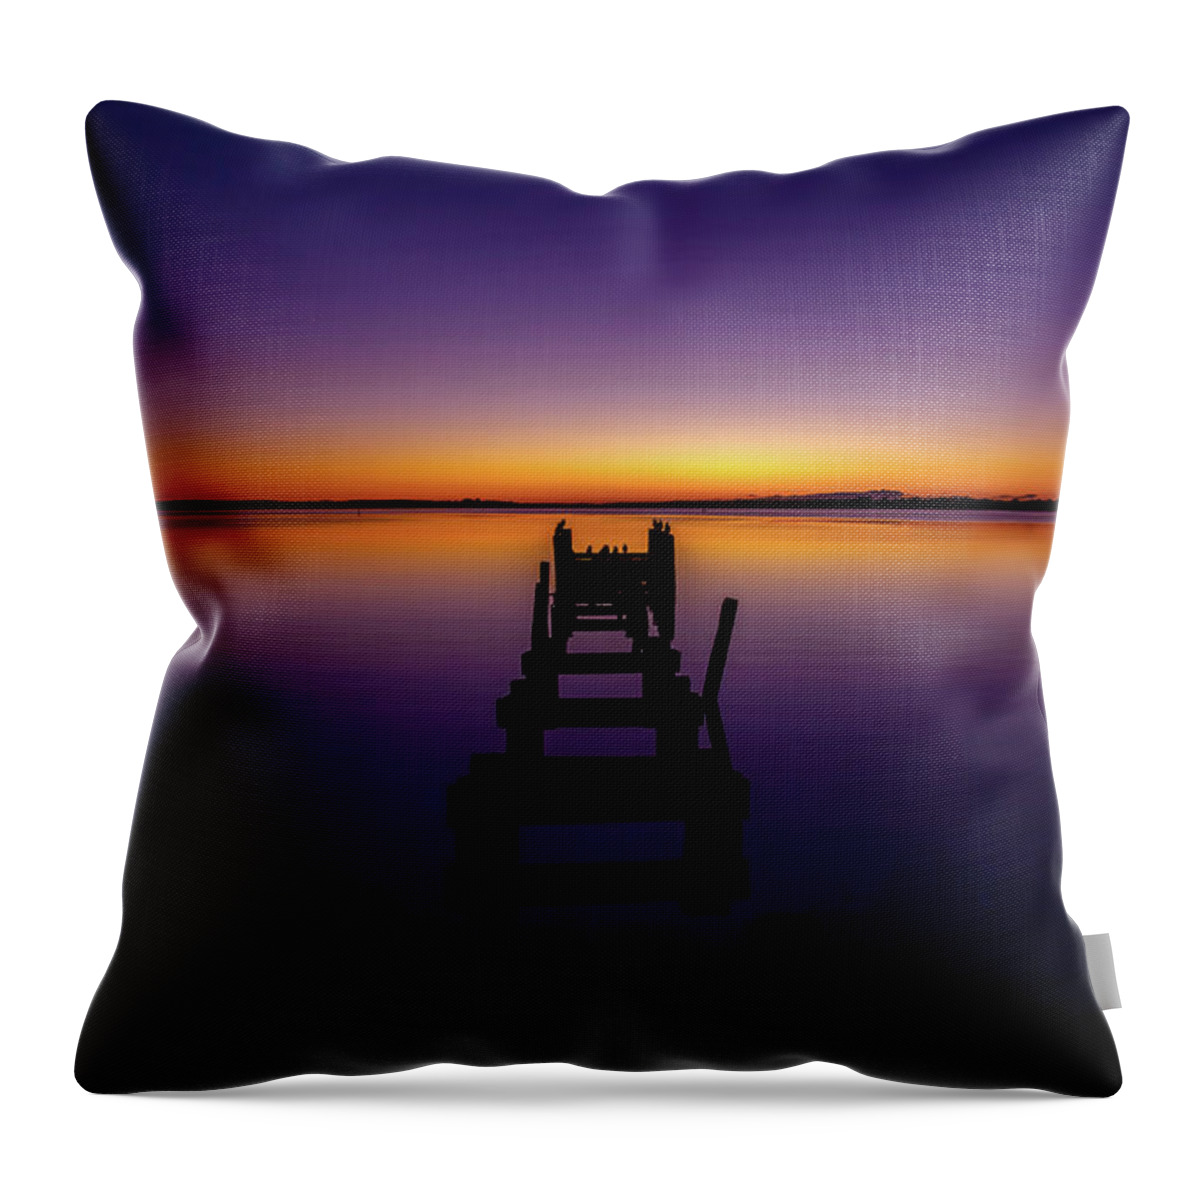 Sunrise Over Lake Throw Pillow featuring the photograph Begin A Bright Future by Az Jackson